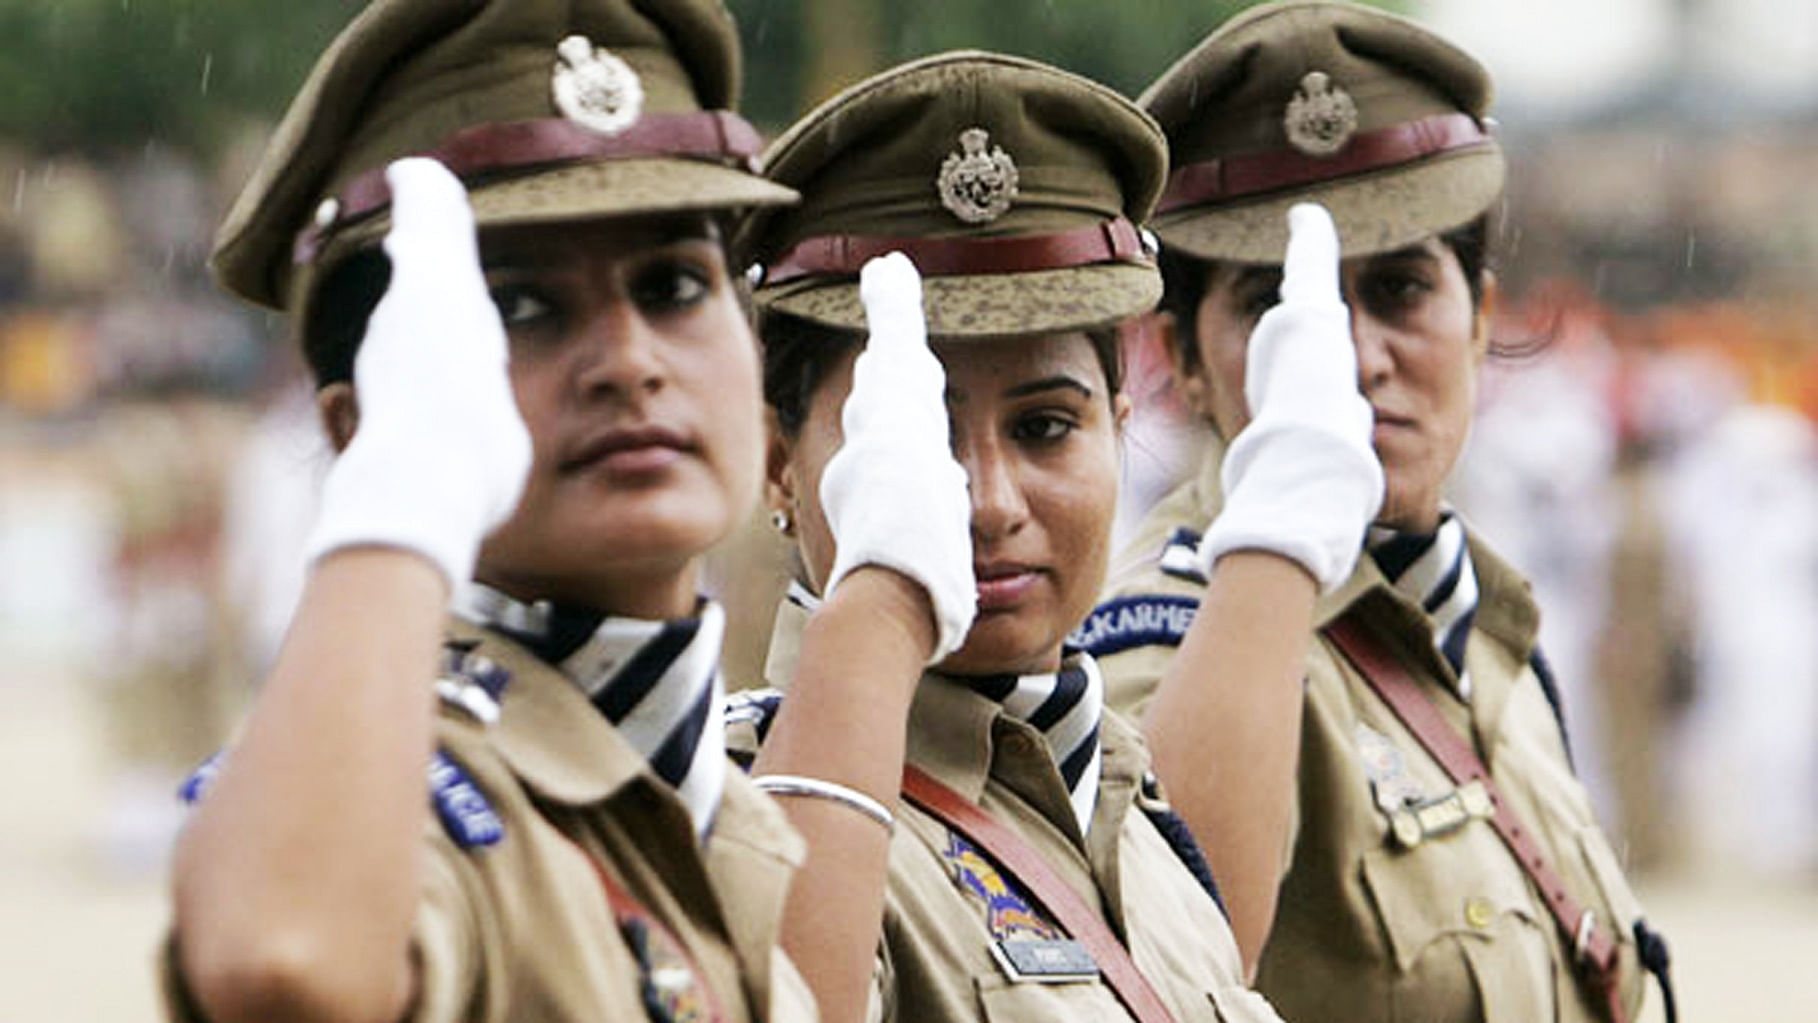 Women can now be inducted as officers in combat roles in all five CAPF’s. (Photo Courtesy: Indian Women Police Network’s <a href="https://www.facebook.com/Indian-Women-Police-Network-IWPN-347924868616467/photos_stream">Facebook</a> Page)